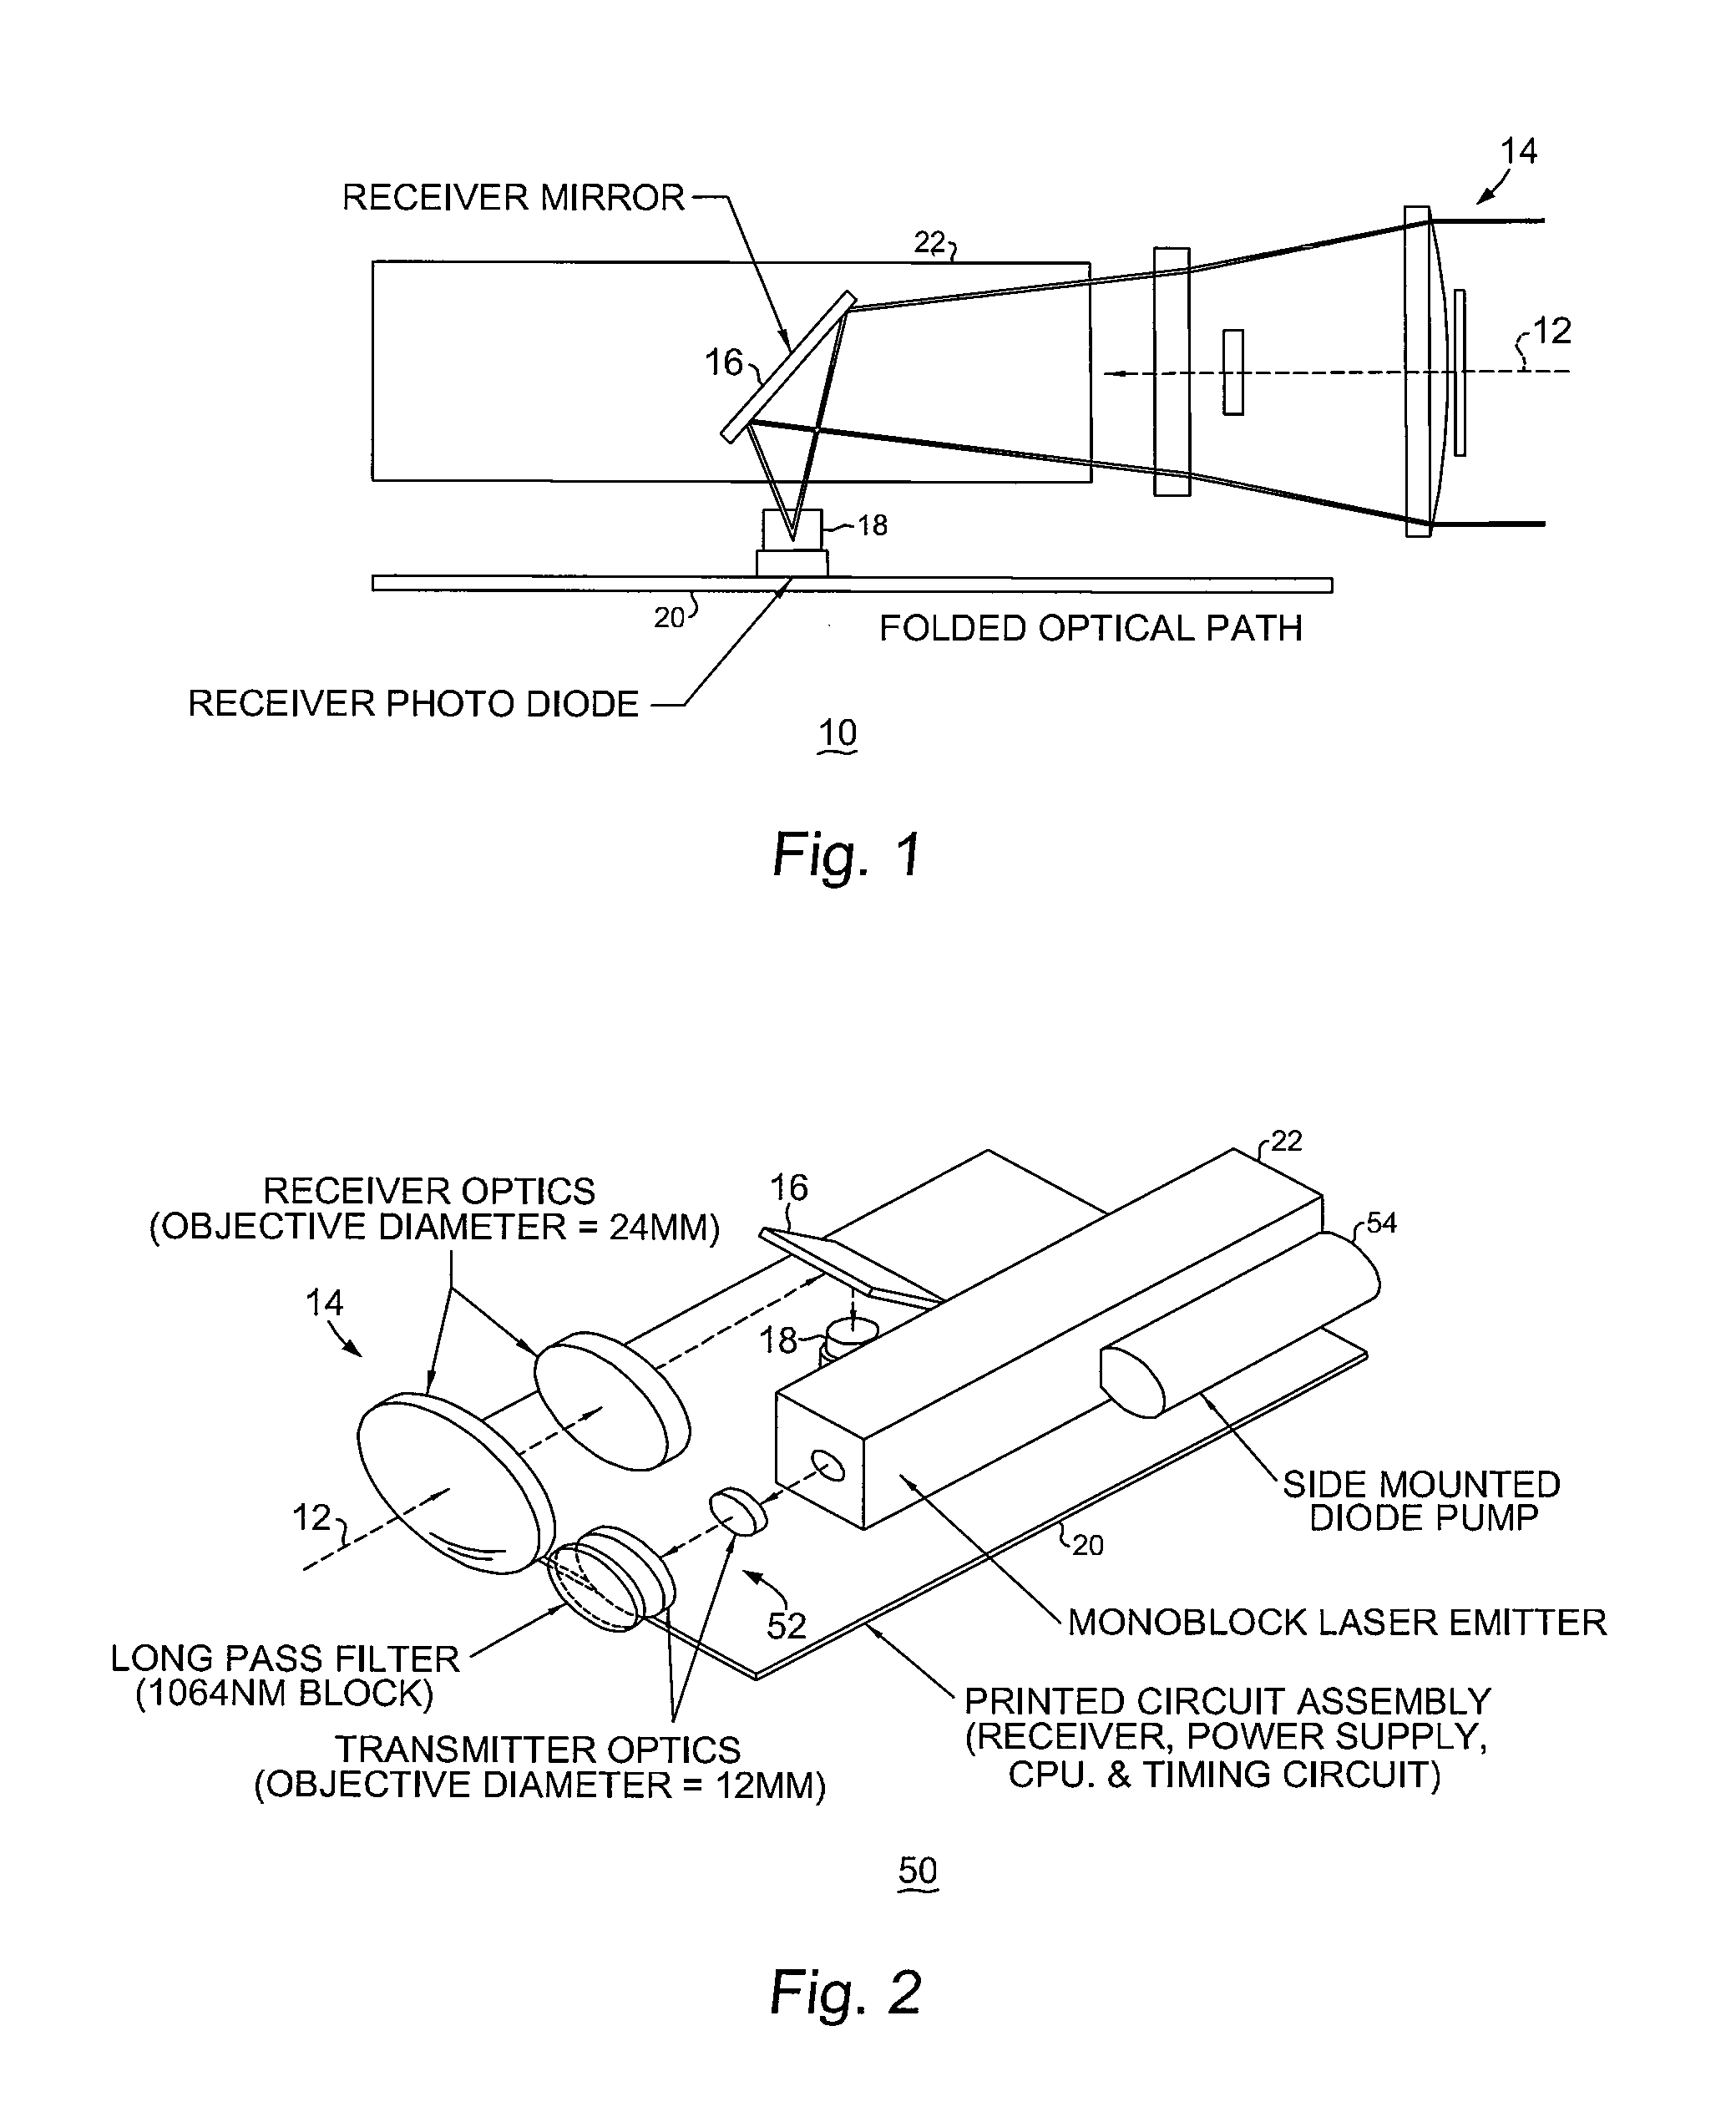 Non-saturating receiver design and clamping structure for high power laser based rangefinding instruments